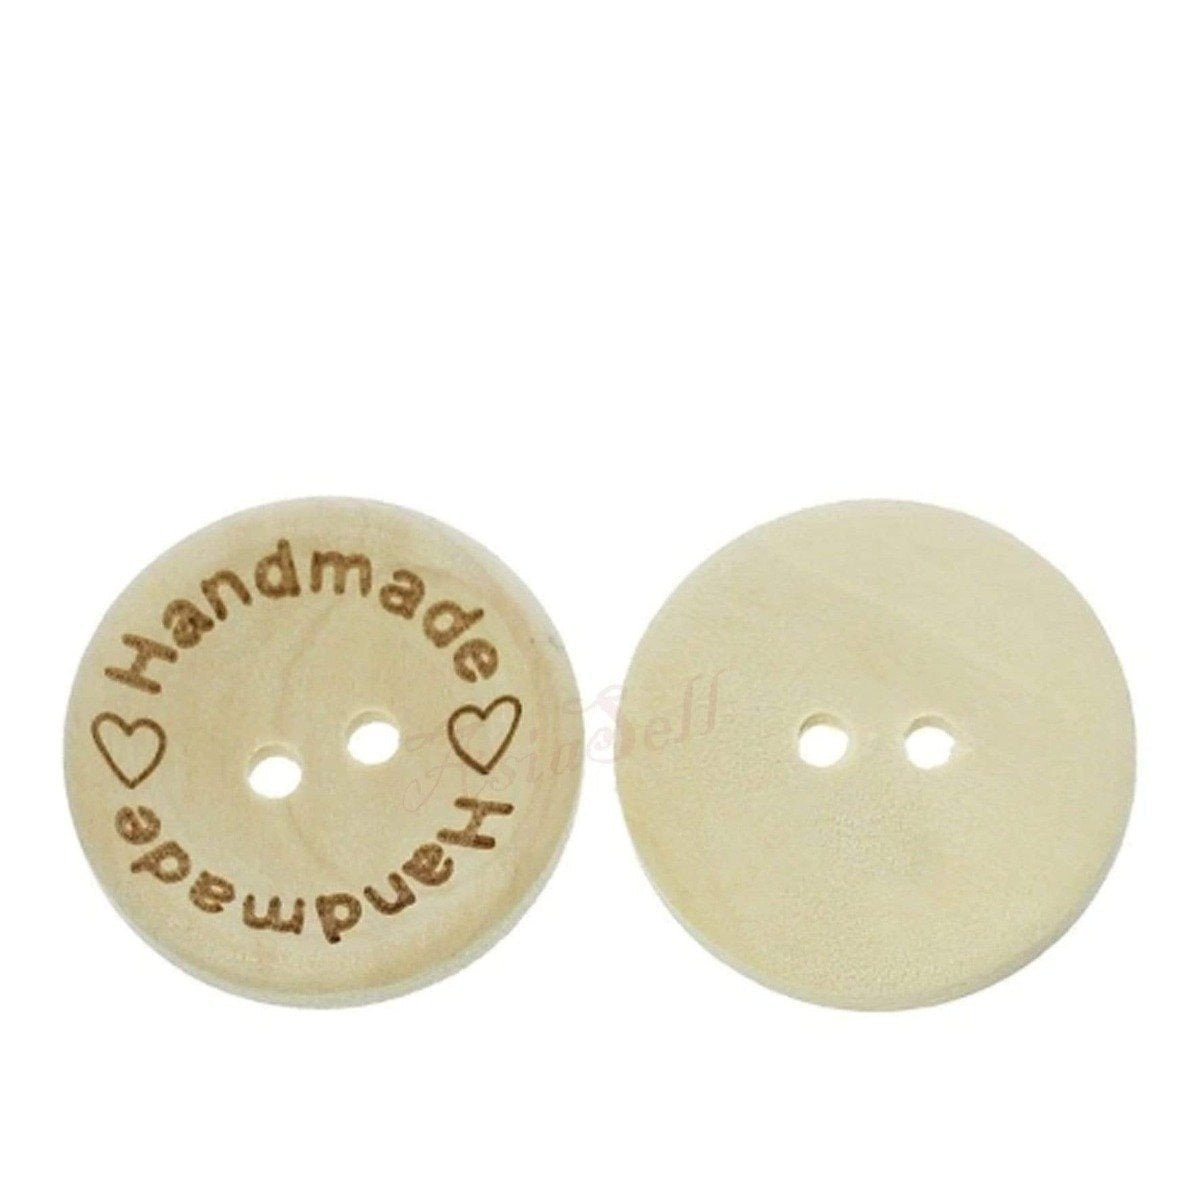 25pcs Wooden Buttons 2-Holes Handmade with Love Round Button Handmade Clothes - 20mm "Handmade Handmade" - - Asia Sell